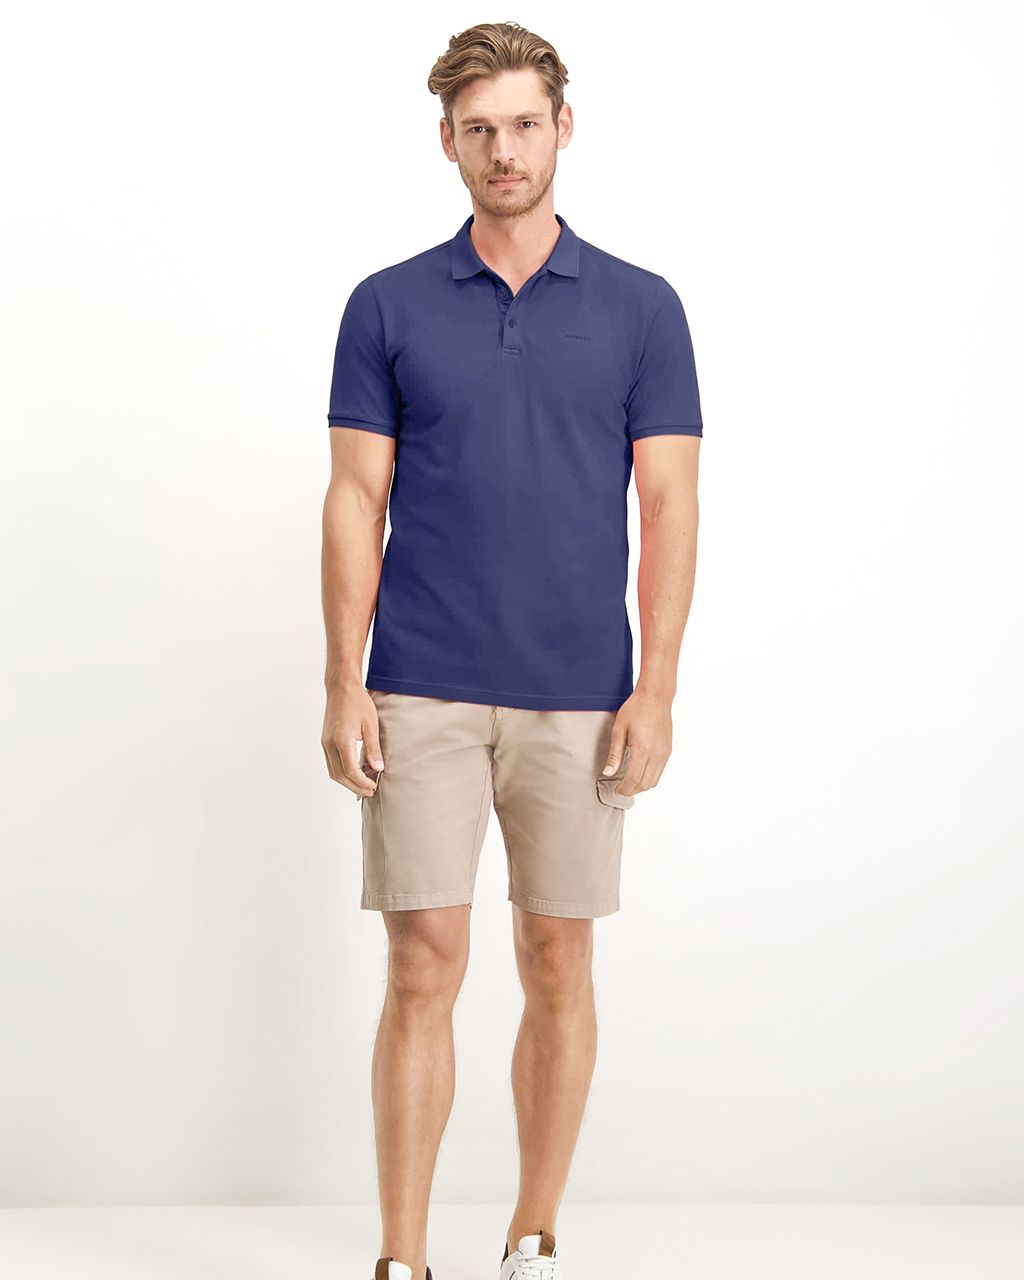 State of Art Polo KM Donker blauw 075928-001-4XL